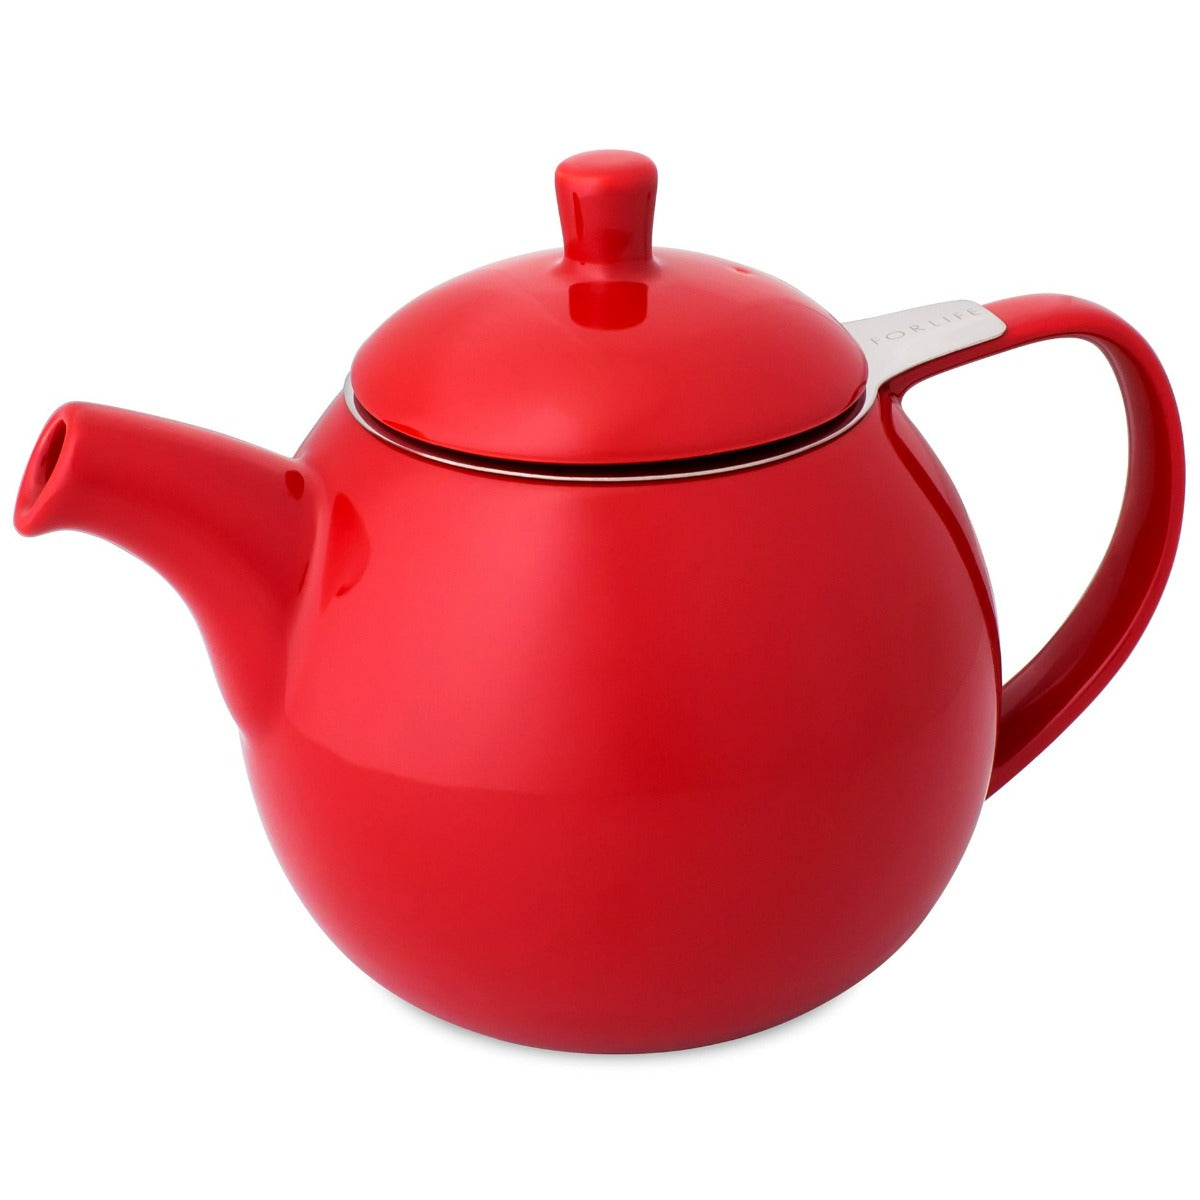 Curve teapot - Red